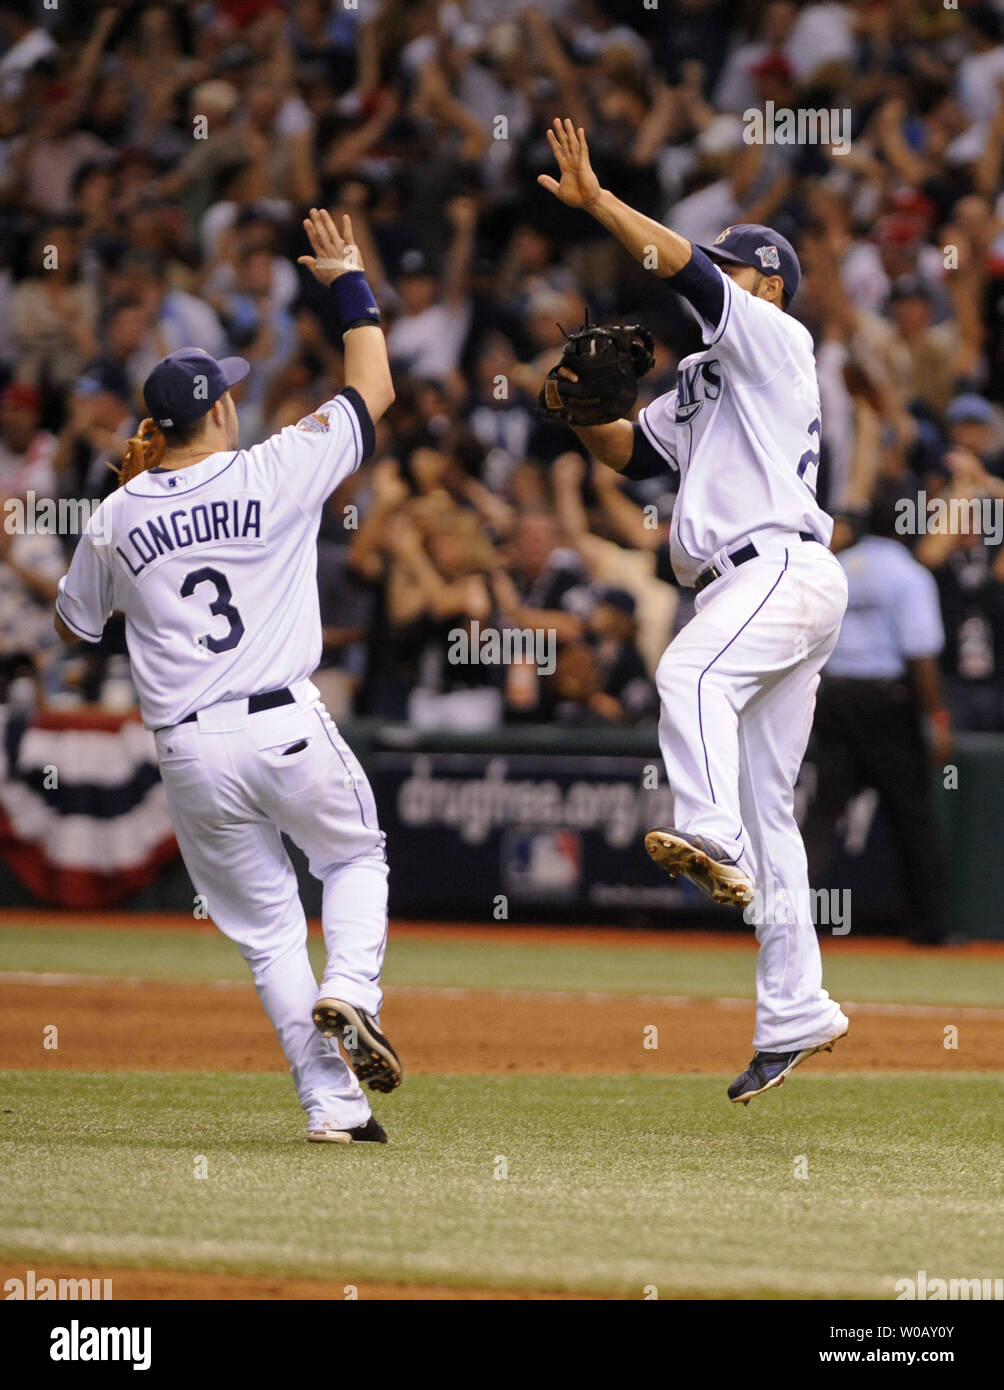 Tampa Bay Rays first baseman Carlos Pena (R) and Evan Longoria celebrate after defeating the Philadelphia Phillies 4-2 to win game two of the World Series at Tropicana Field in St. Petersburg, Florida on October 23, 2008.  (UPI Photo/Kevin Dietsch) Stock Photo